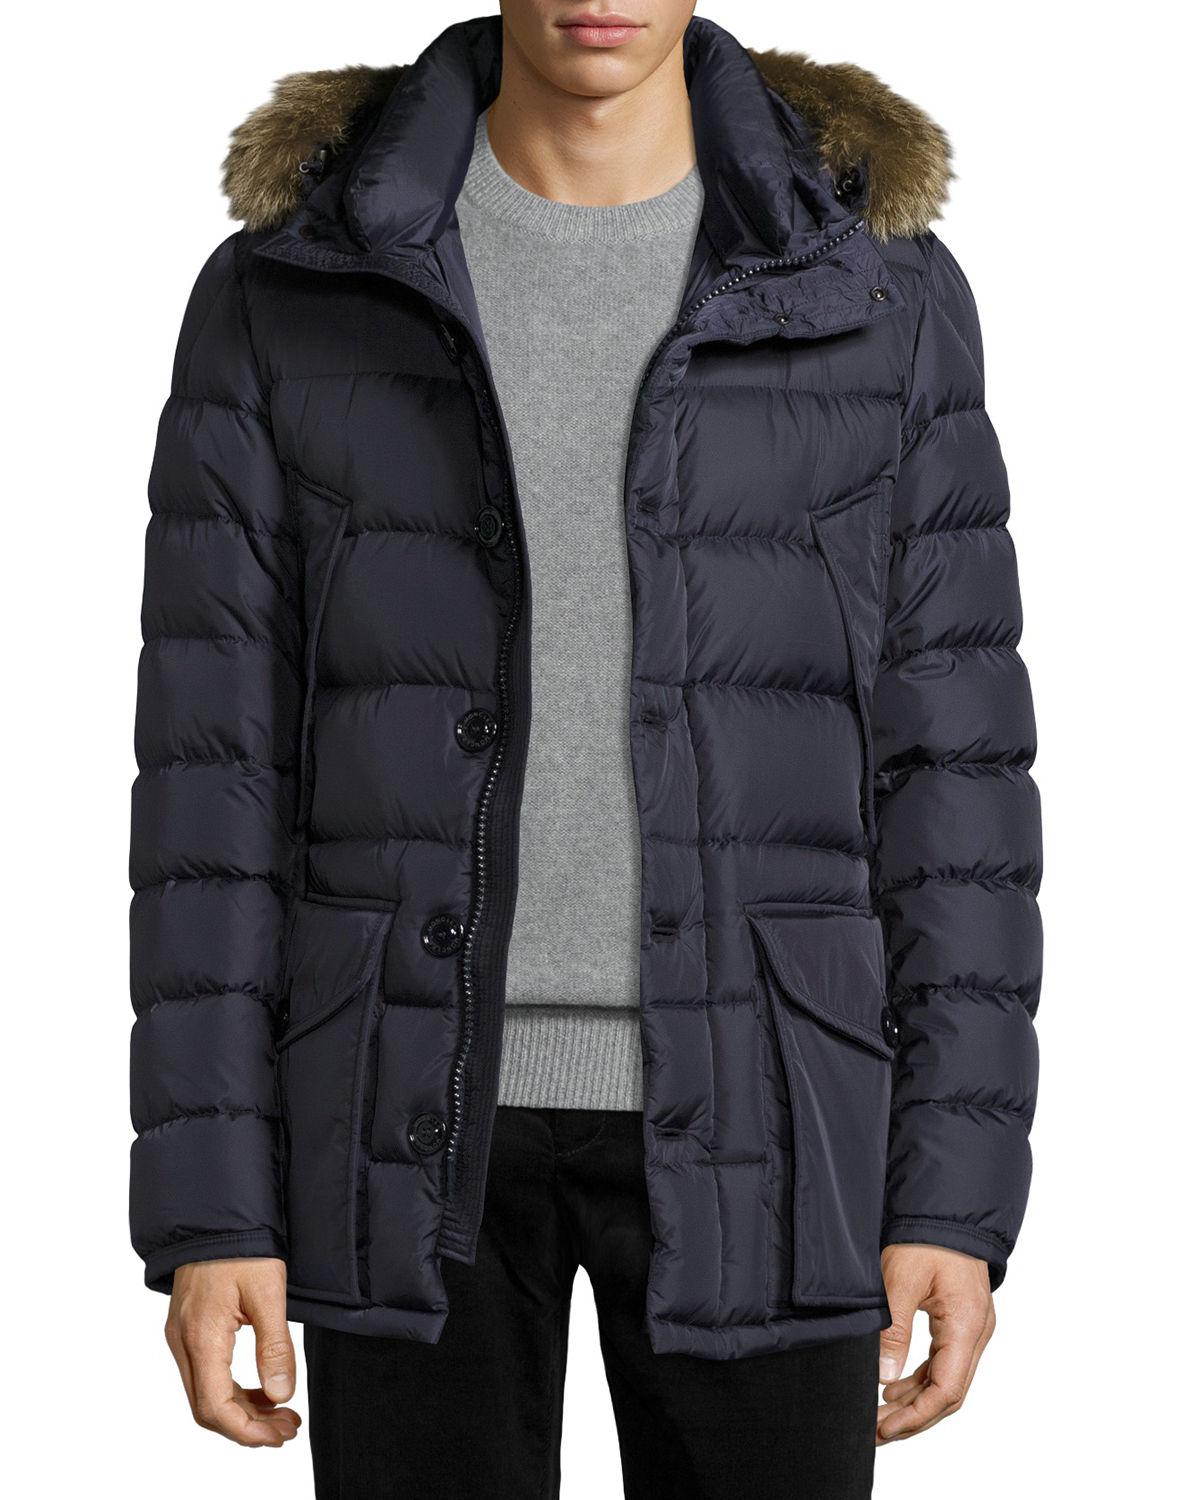 Lyst - Moncler Cluny Nylon Puffer Jacket With Fur Hood in Blue for Men